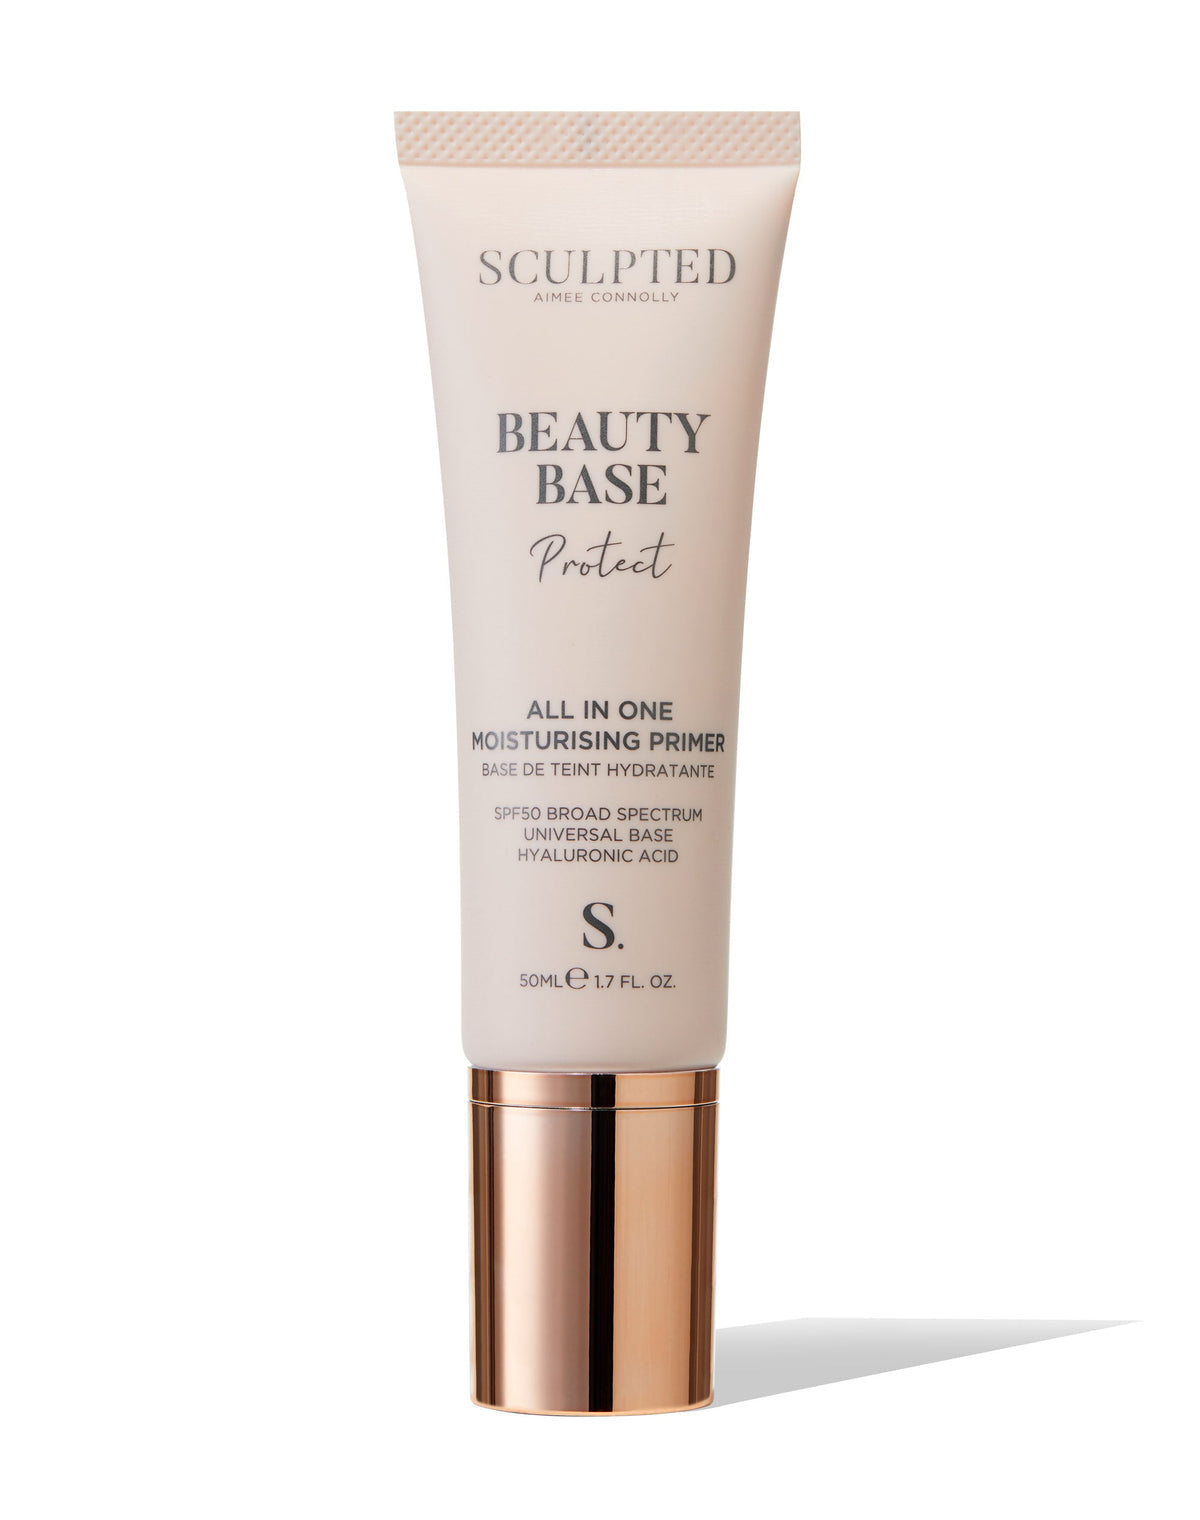 SCULPTED by Aimee Connolly Beauty Base Protect